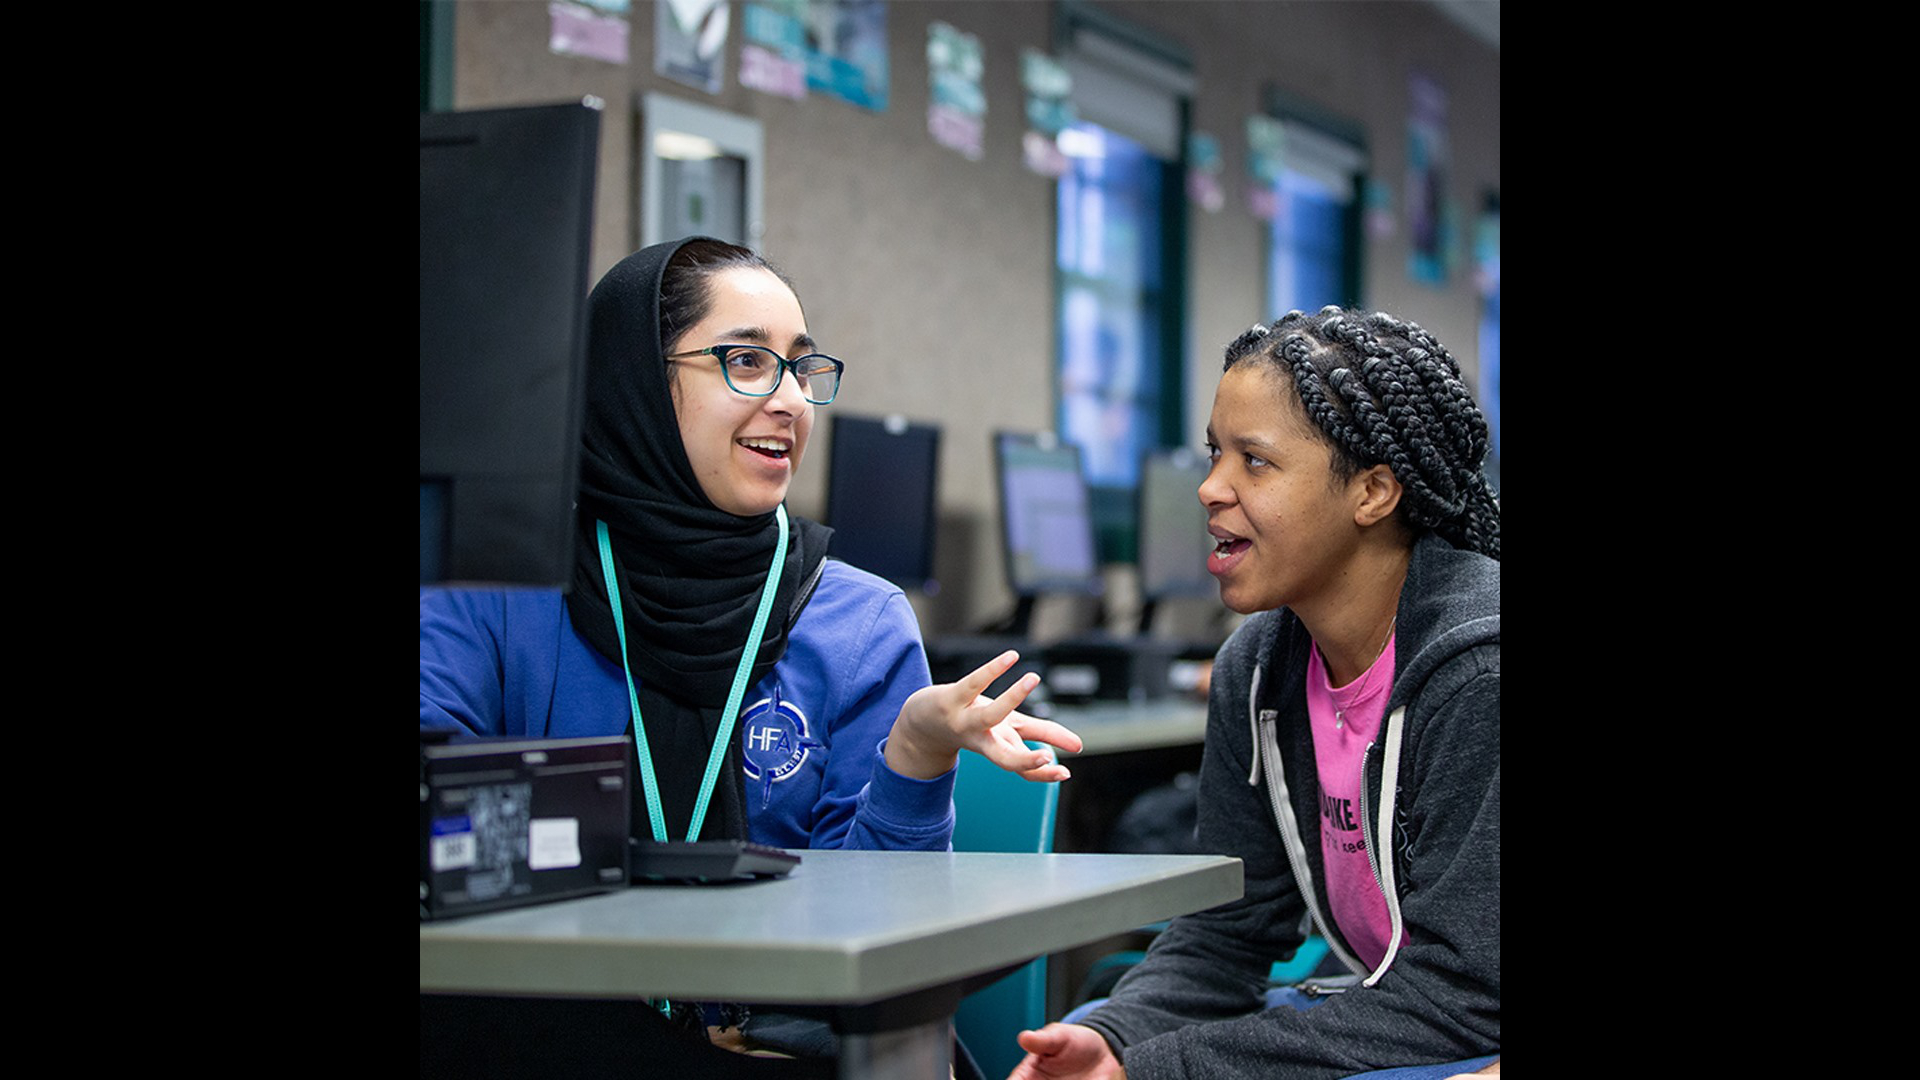 A student in hijab learns tech from an instructor